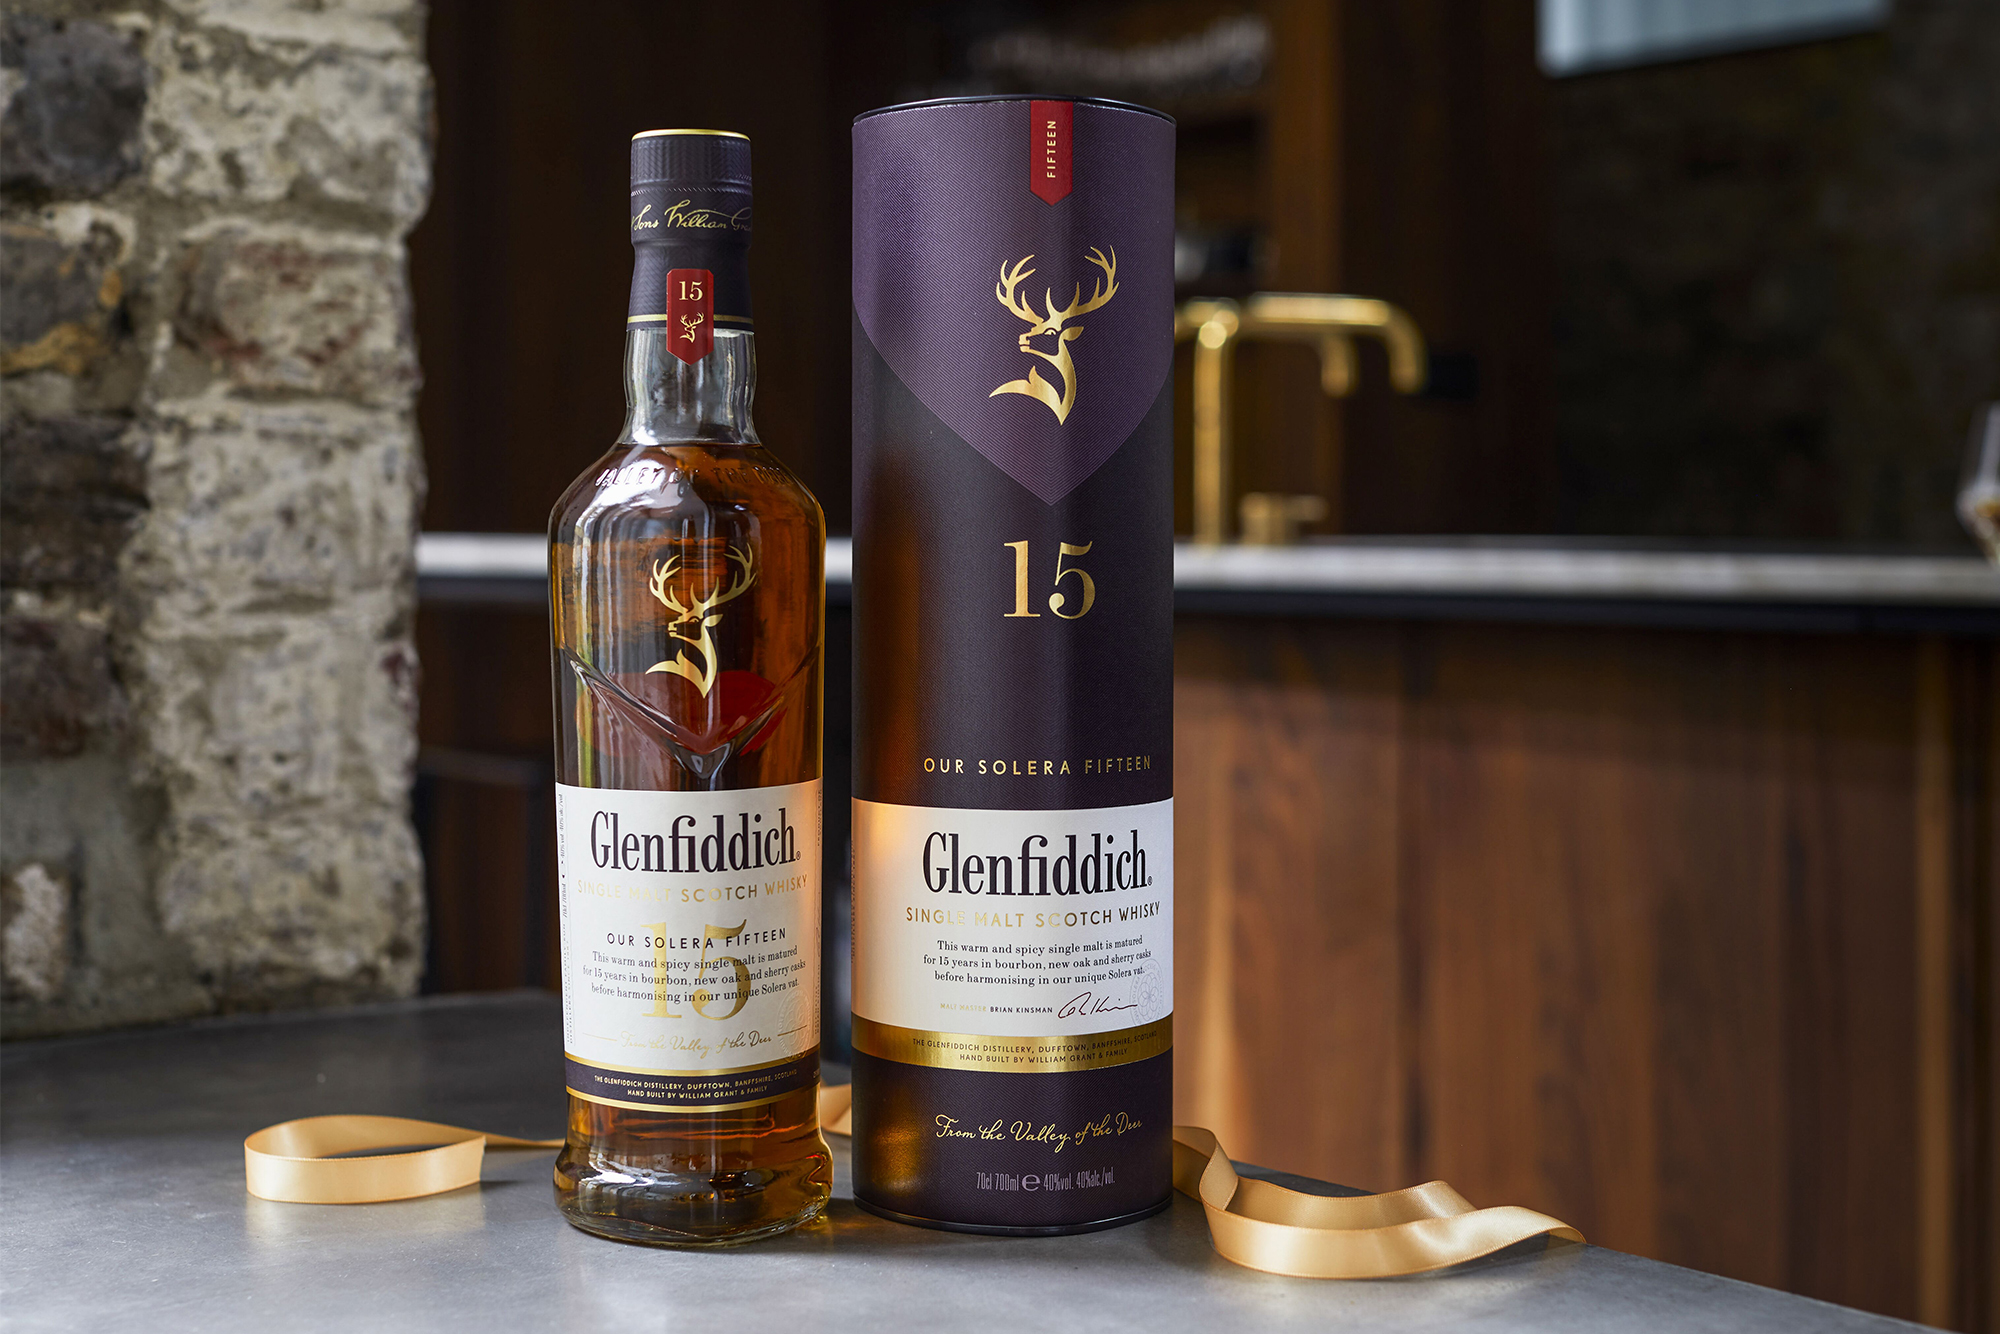 Glenfiddich Tasting Guide 15 year old